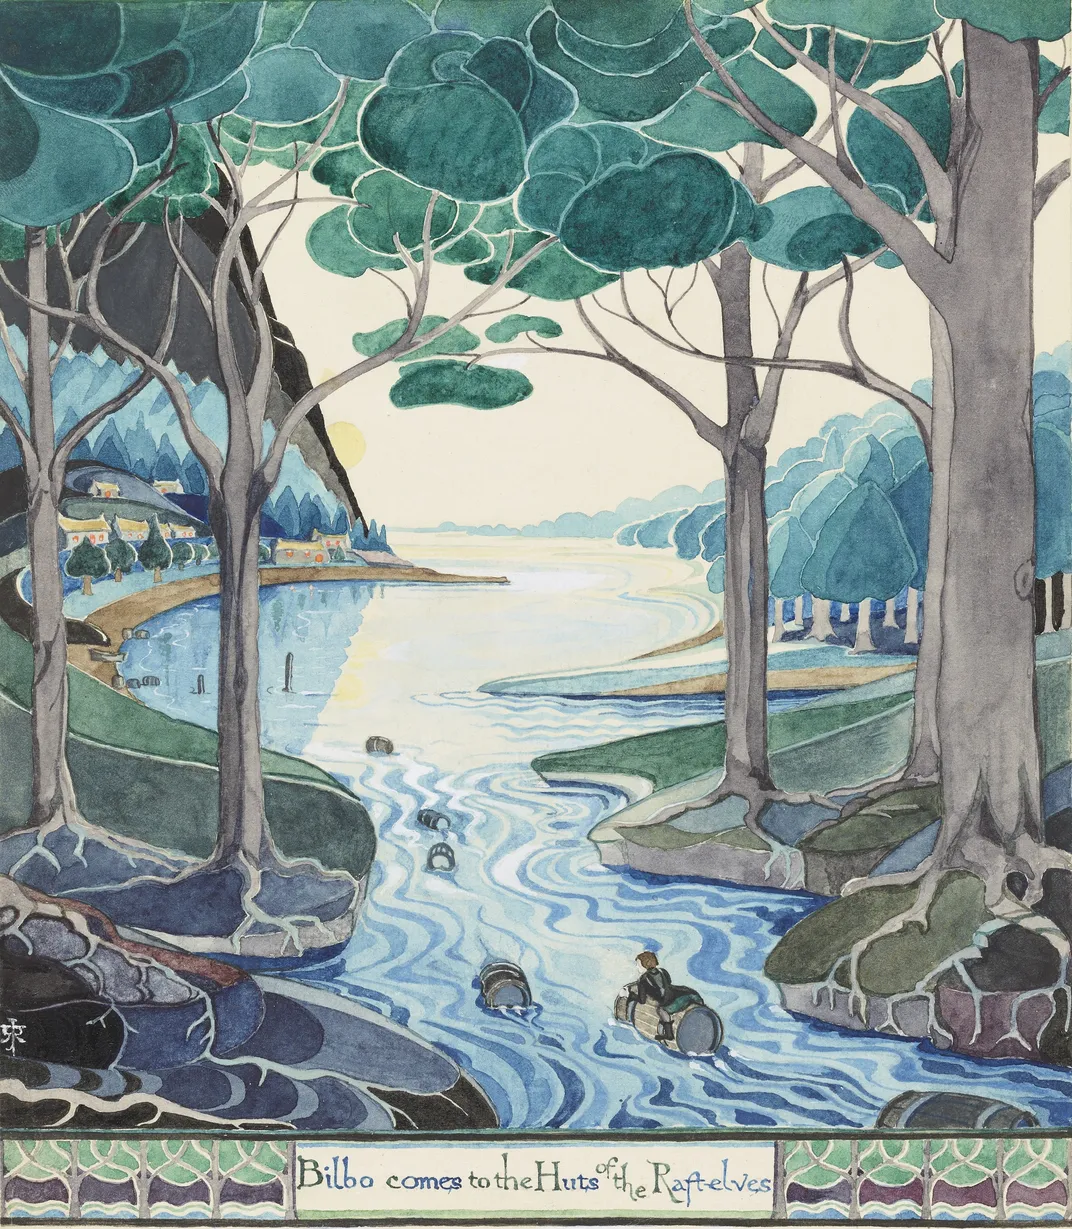 A watery blue-green scene of a small hobbit clinging to a tree branch, floating down a gorgeous river